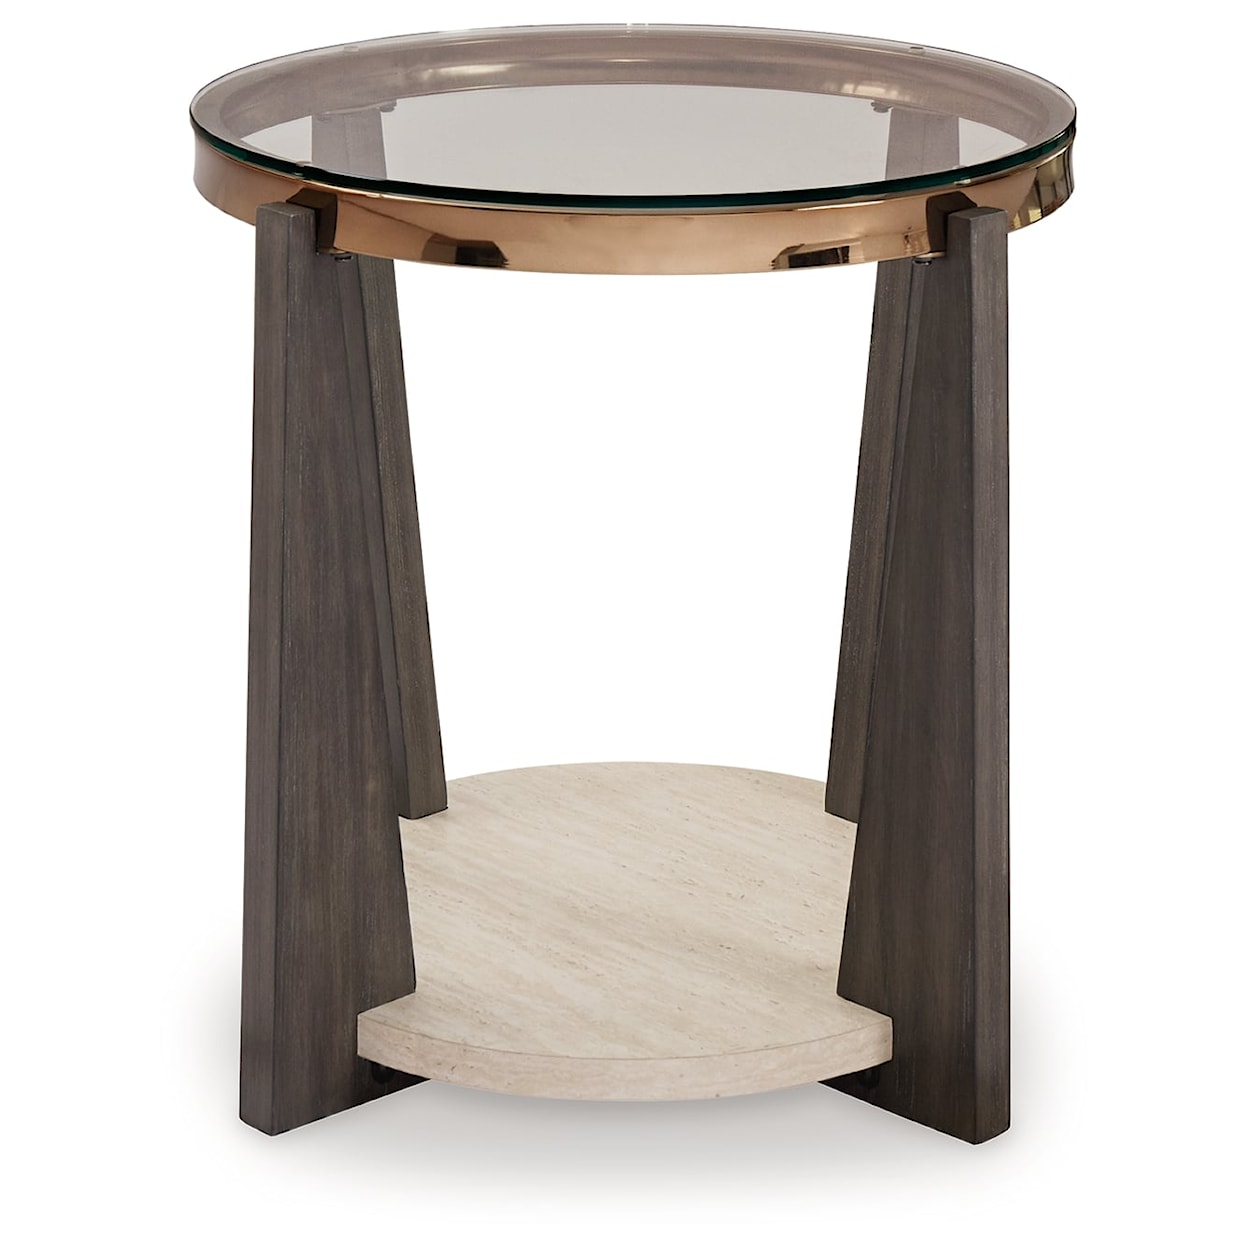 Signature Design by Ashley Furniture Frazwa Round End Table